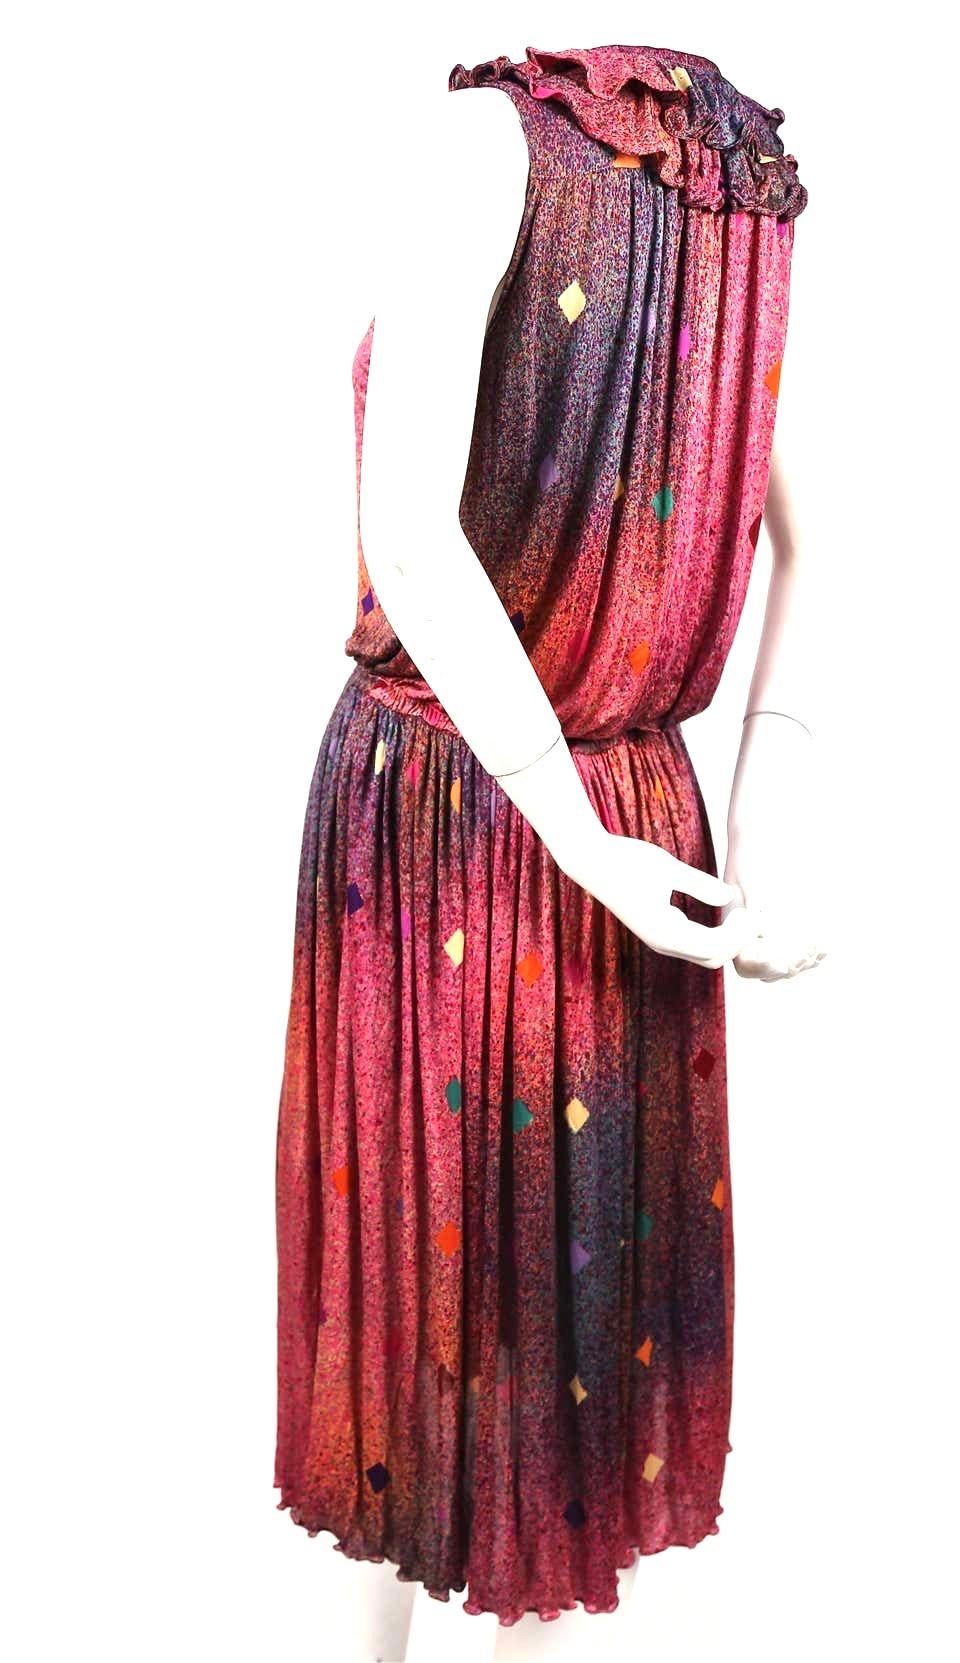 Brightly colored, printed, silk-jersey dress with ruffled neckline from Missoni dating to the late 1970's. Fits a size S or M. Approximate measurements: waist 27